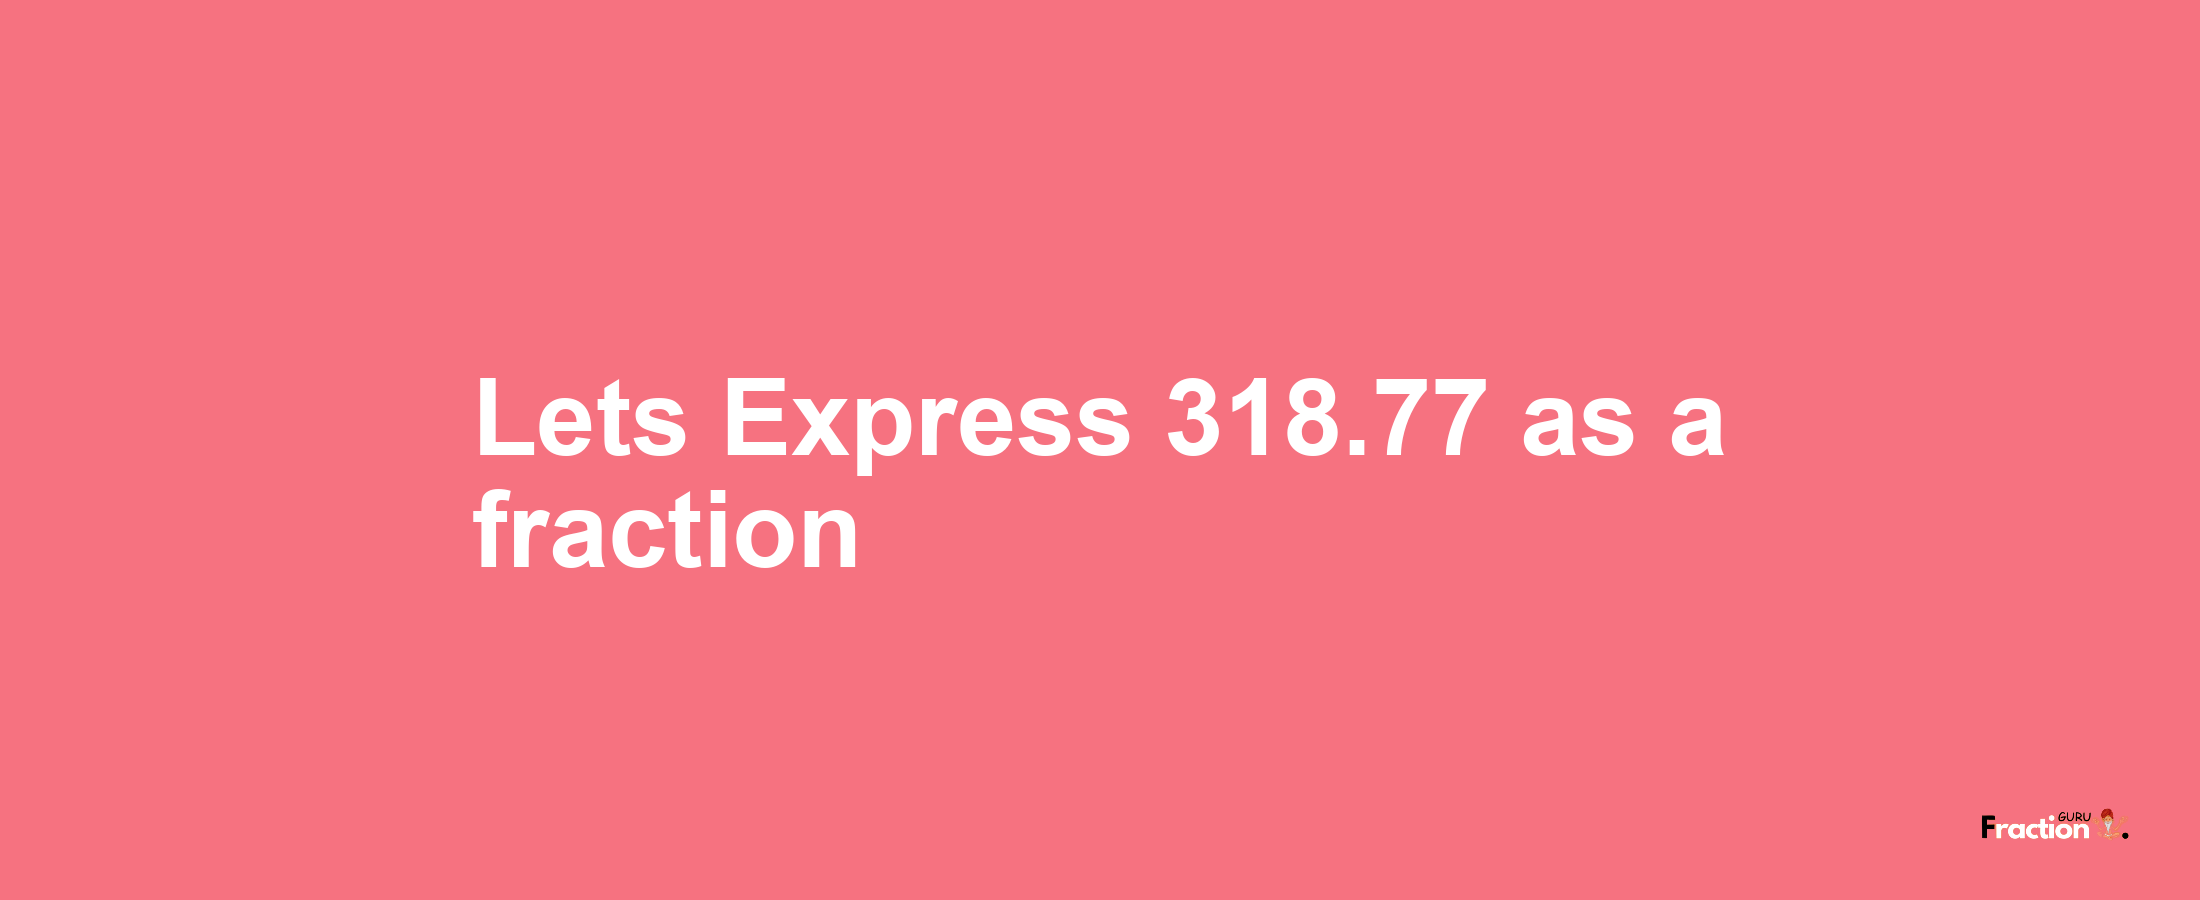 Lets Express 318.77 as afraction